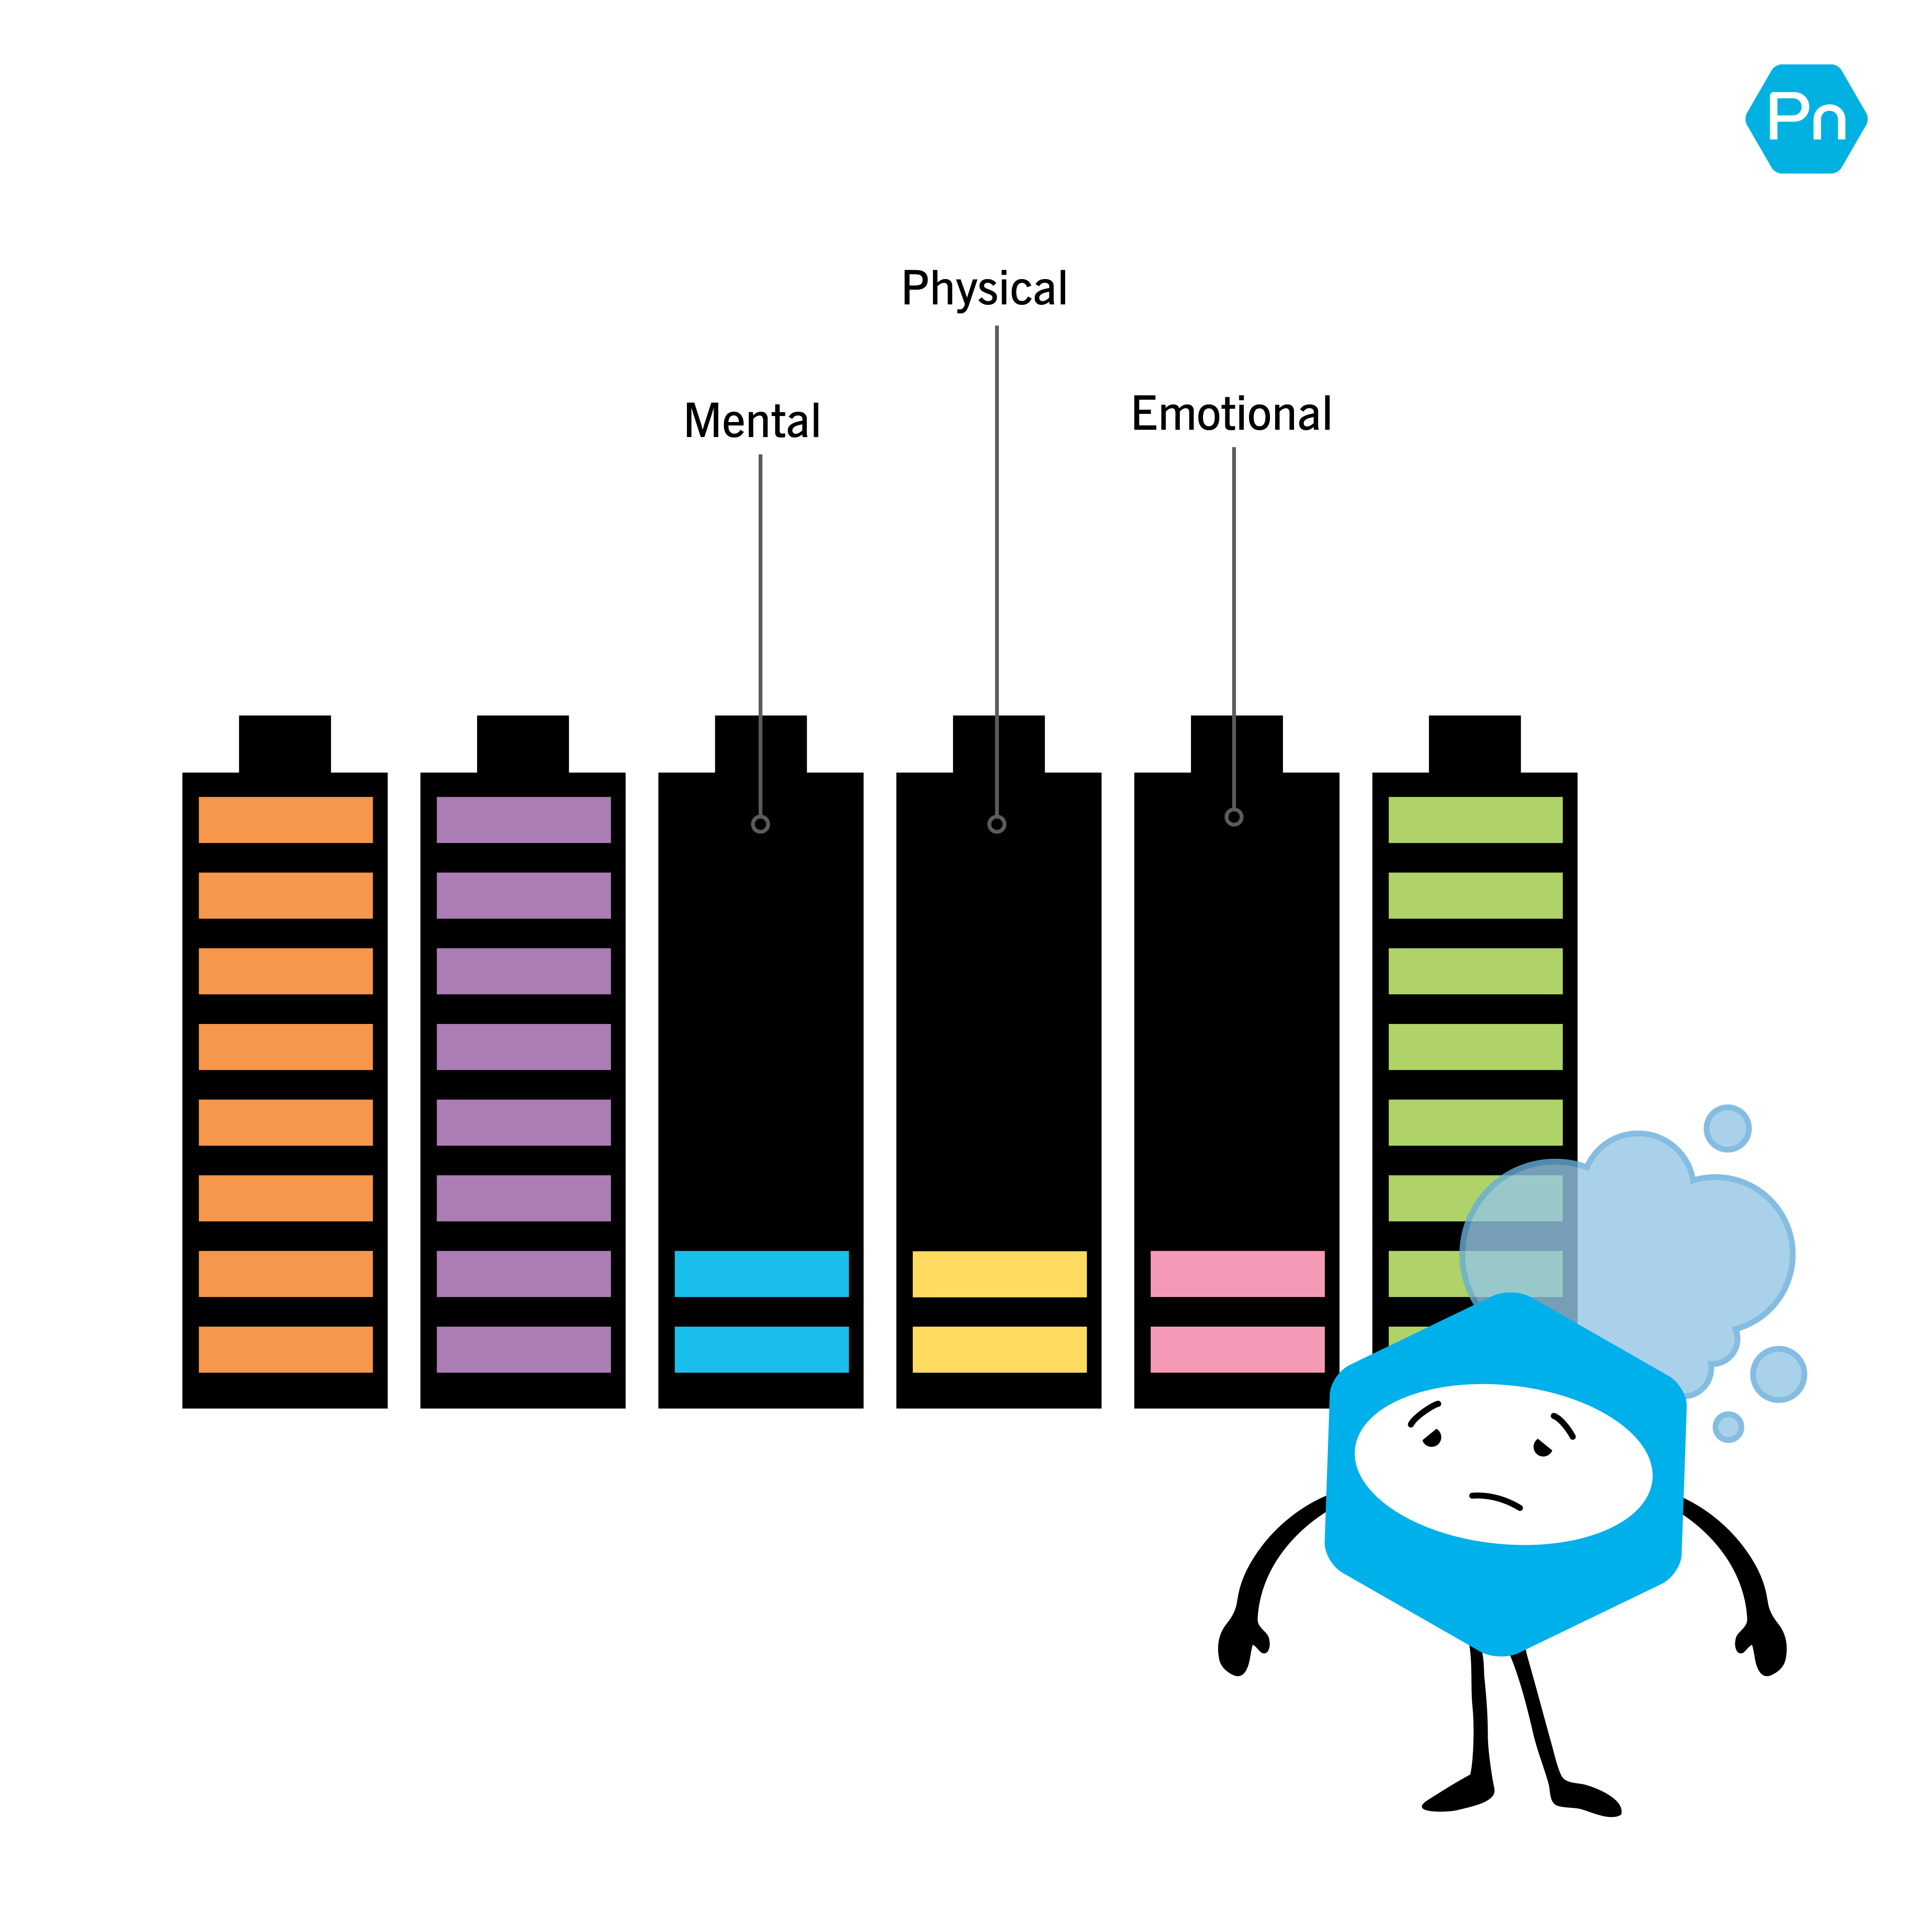 Graphic depiction of six deep health dimensions shown as batteries (Social, Existential, Mental, Physical, Emotional, and Environmental), showing that too much junk food can drain your physical health as well as your mental and emotional health.